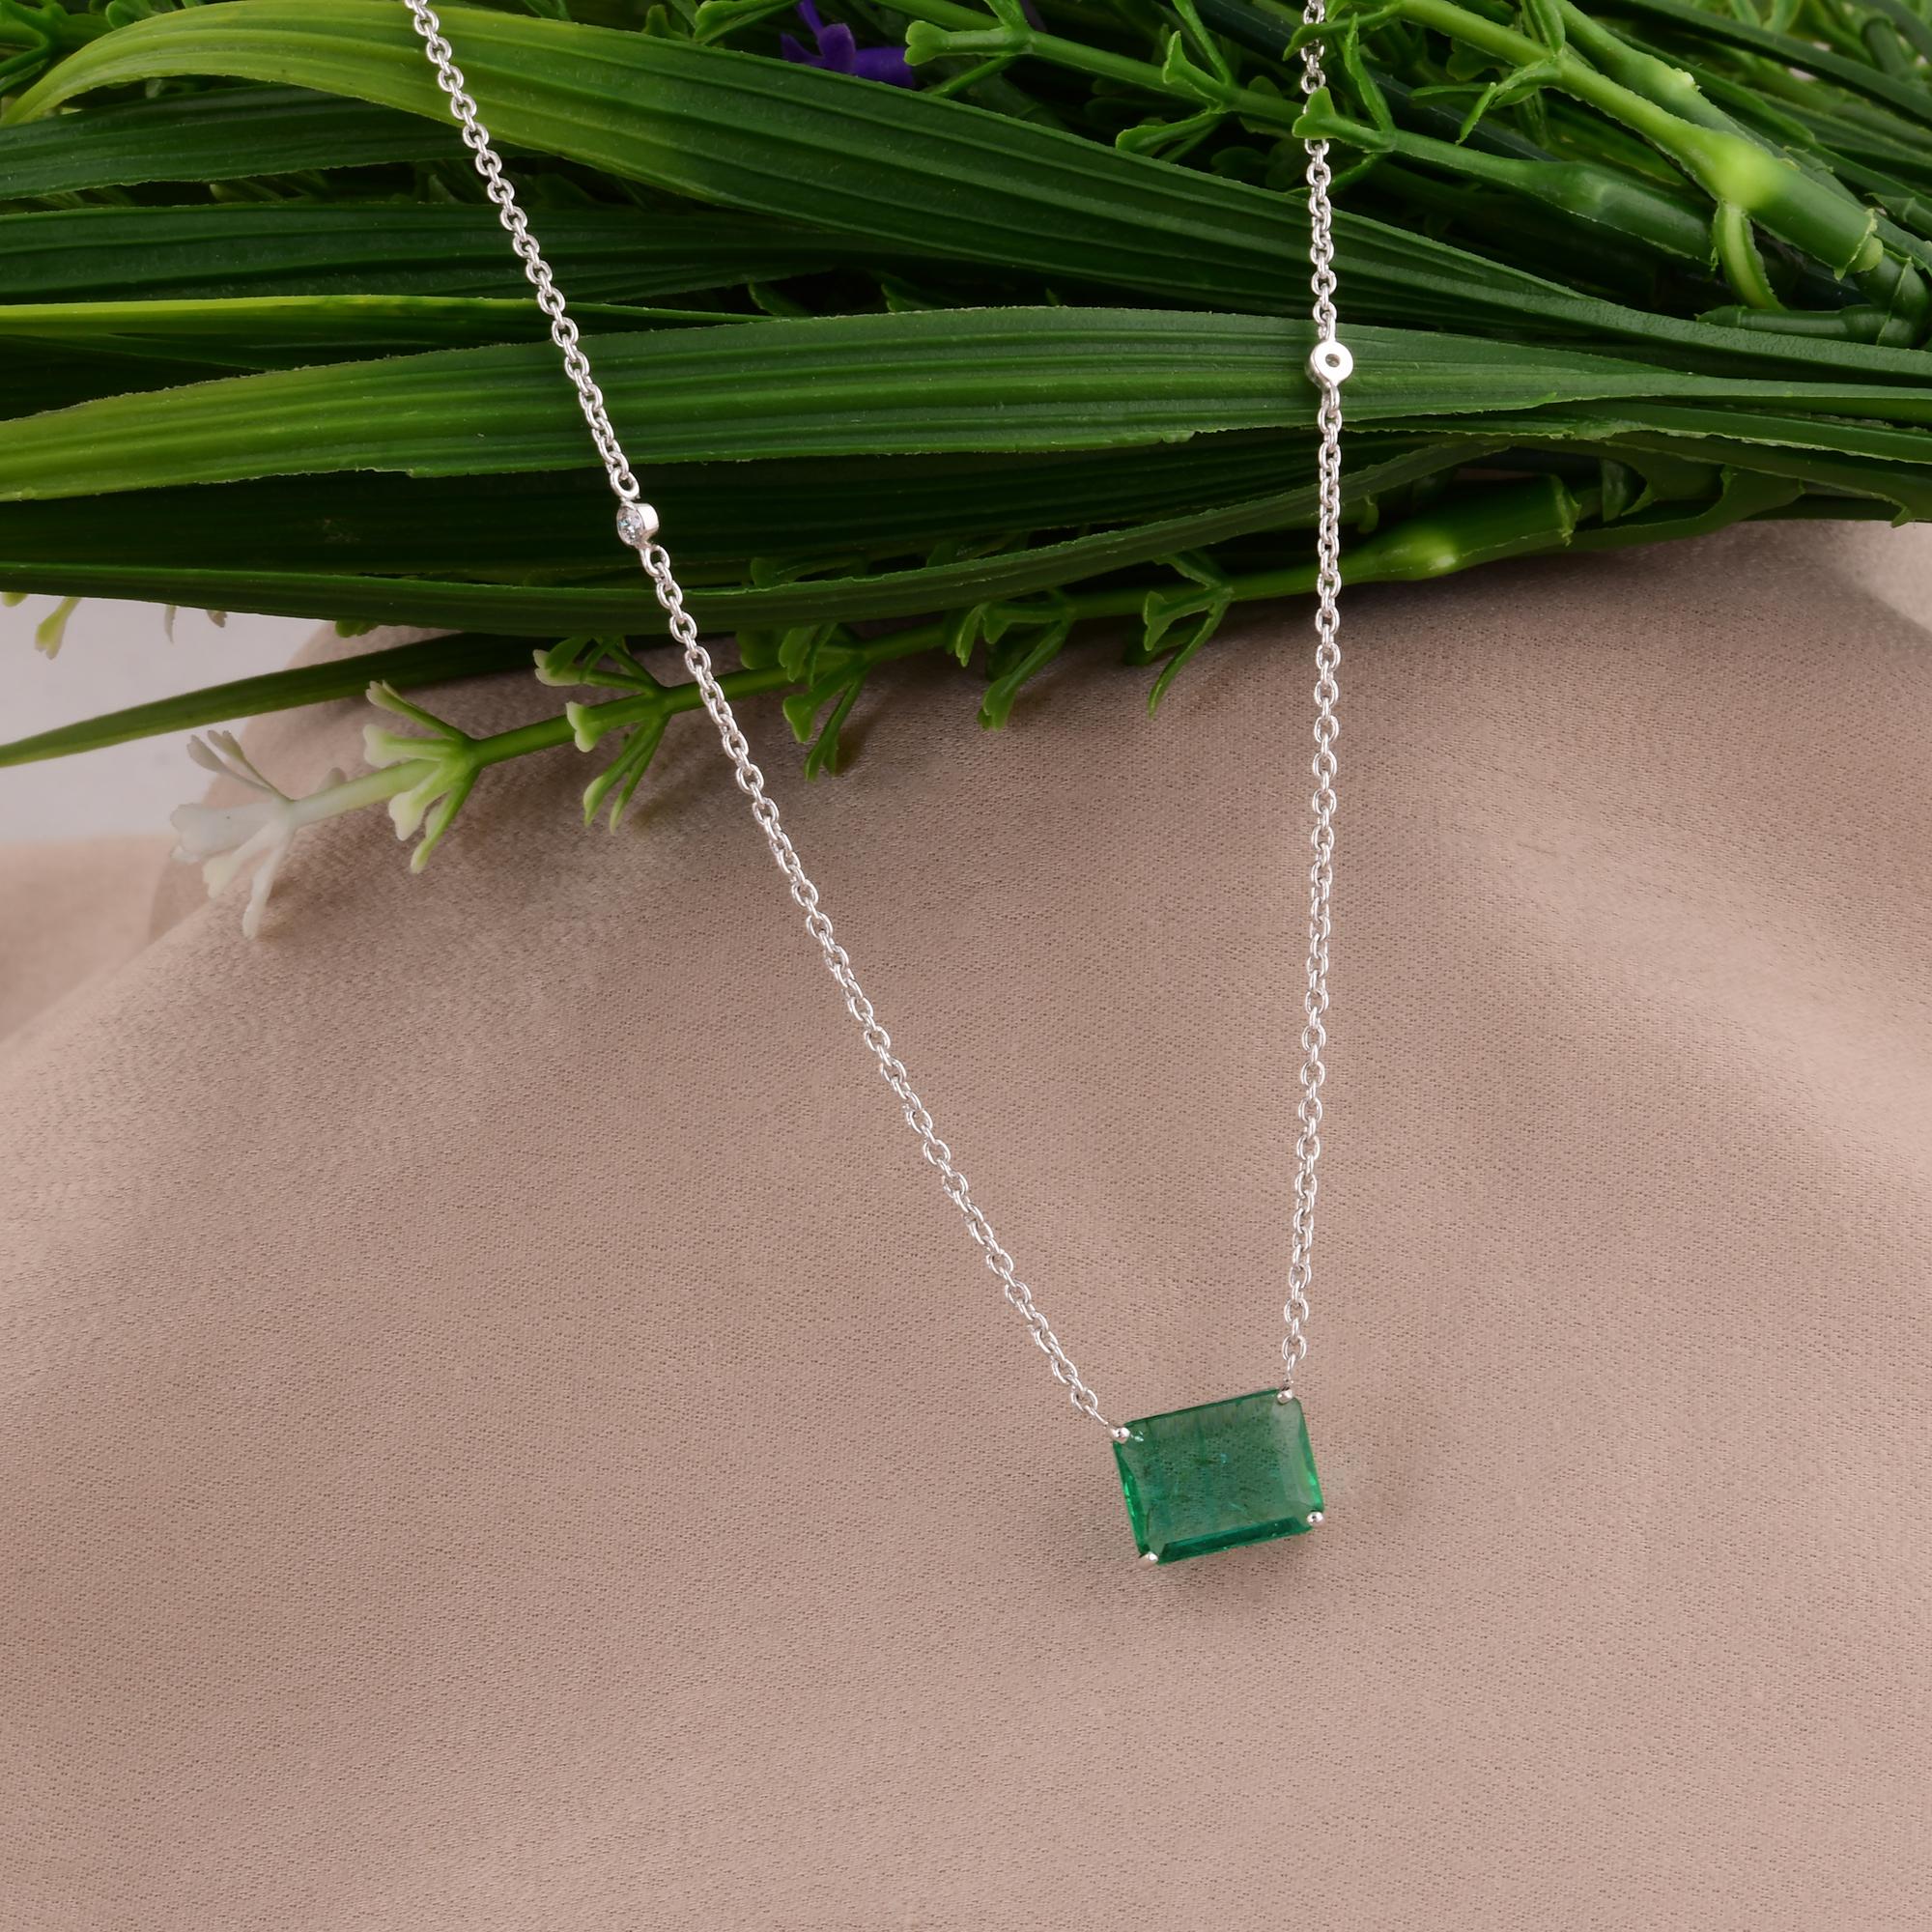 Surrounding the majestic emerald are dazzling diamonds, meticulously set in a halo formation to accentuate its beauty and enhance its allure. These exquisite diamonds, chosen for their exceptional clarity and fire, add a touch of sparkle and glamour